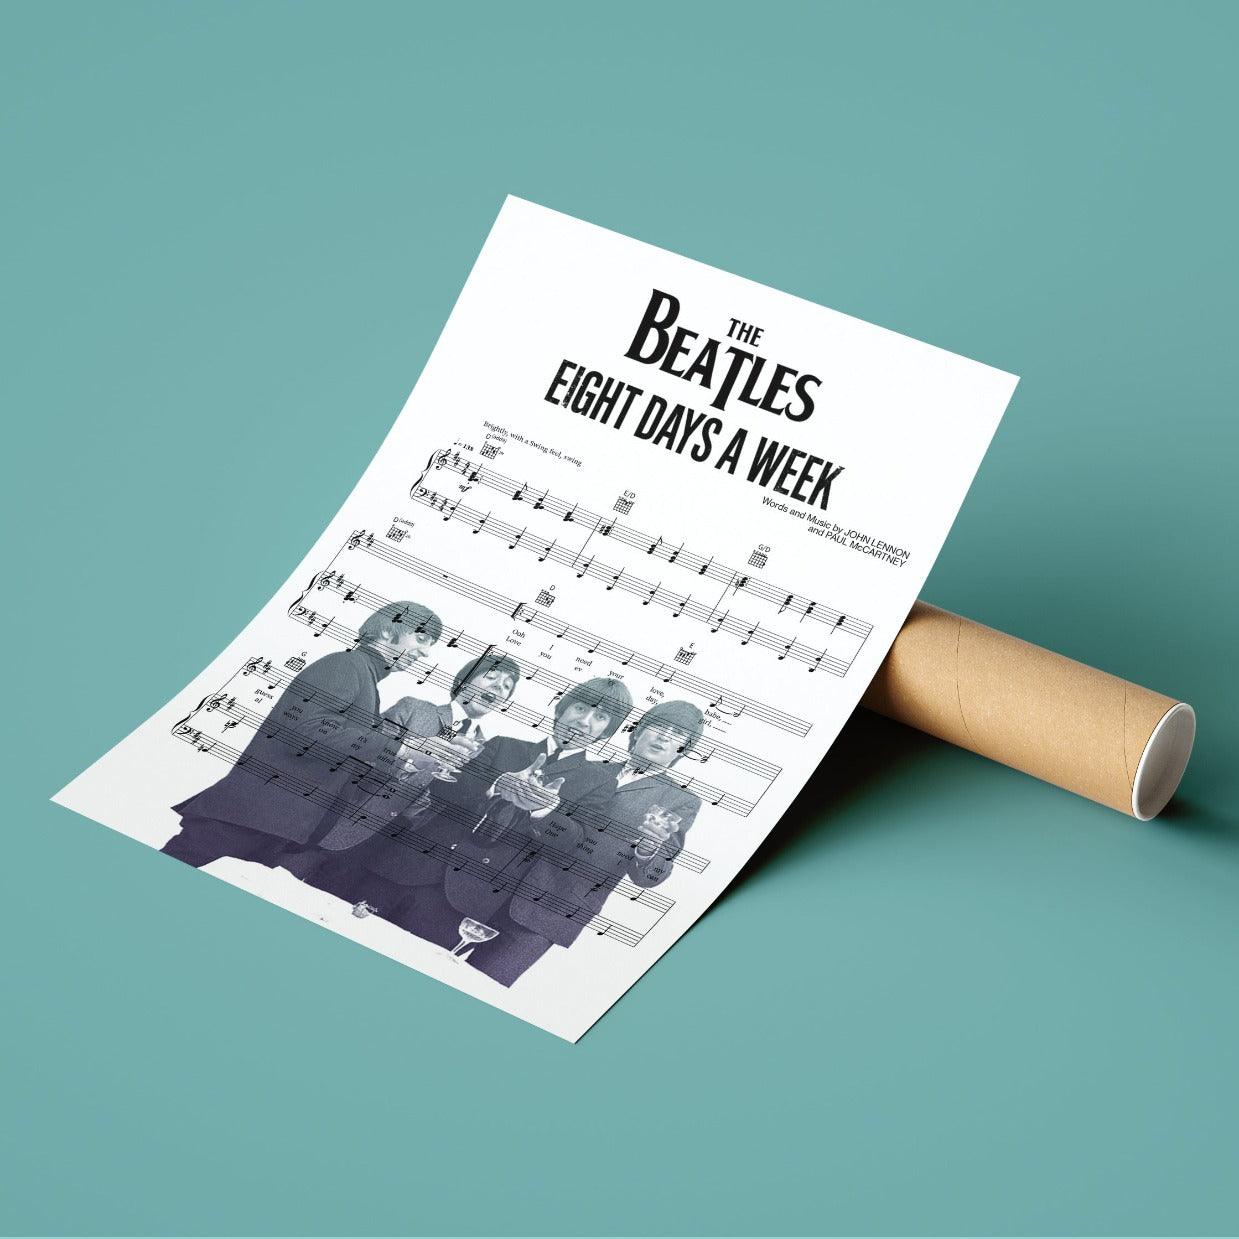 "Eight Days a Week" is a song by the English rock band the Beatles. It was written by Paul McCartney and John Lennon based on McCartney's original idea.